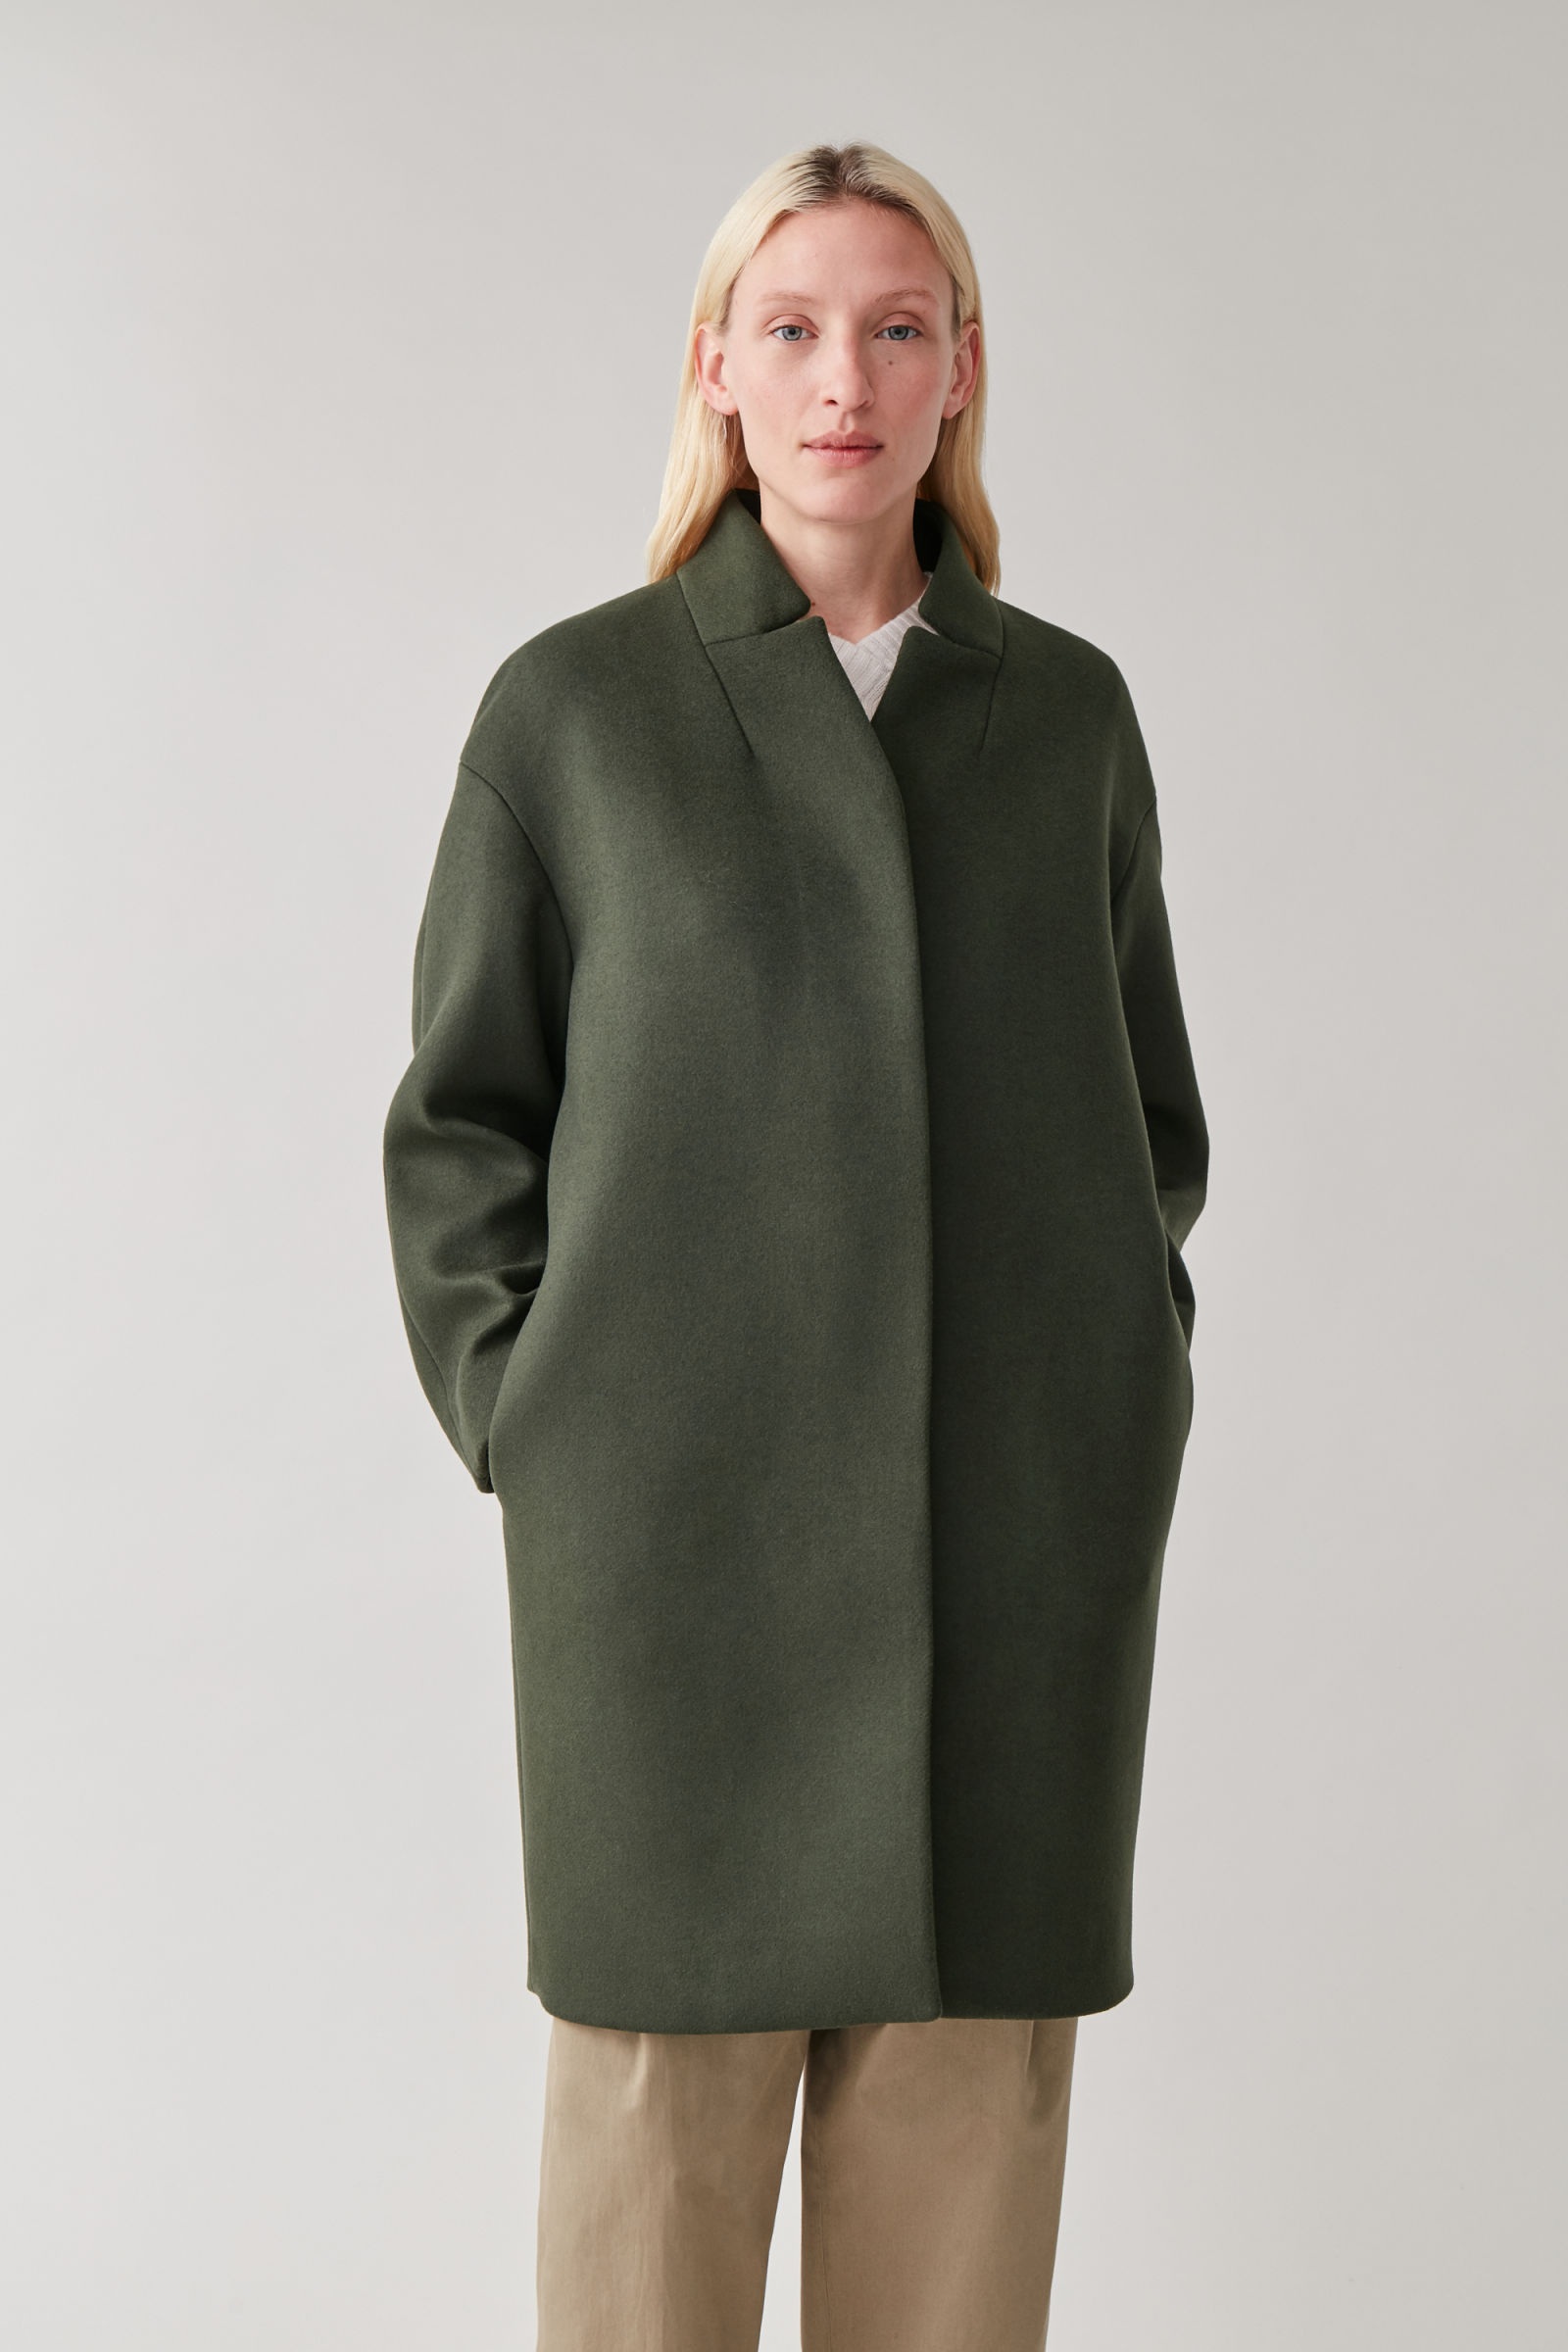 COS - Wool Coat With Stand Colla | ABOUT ICONS